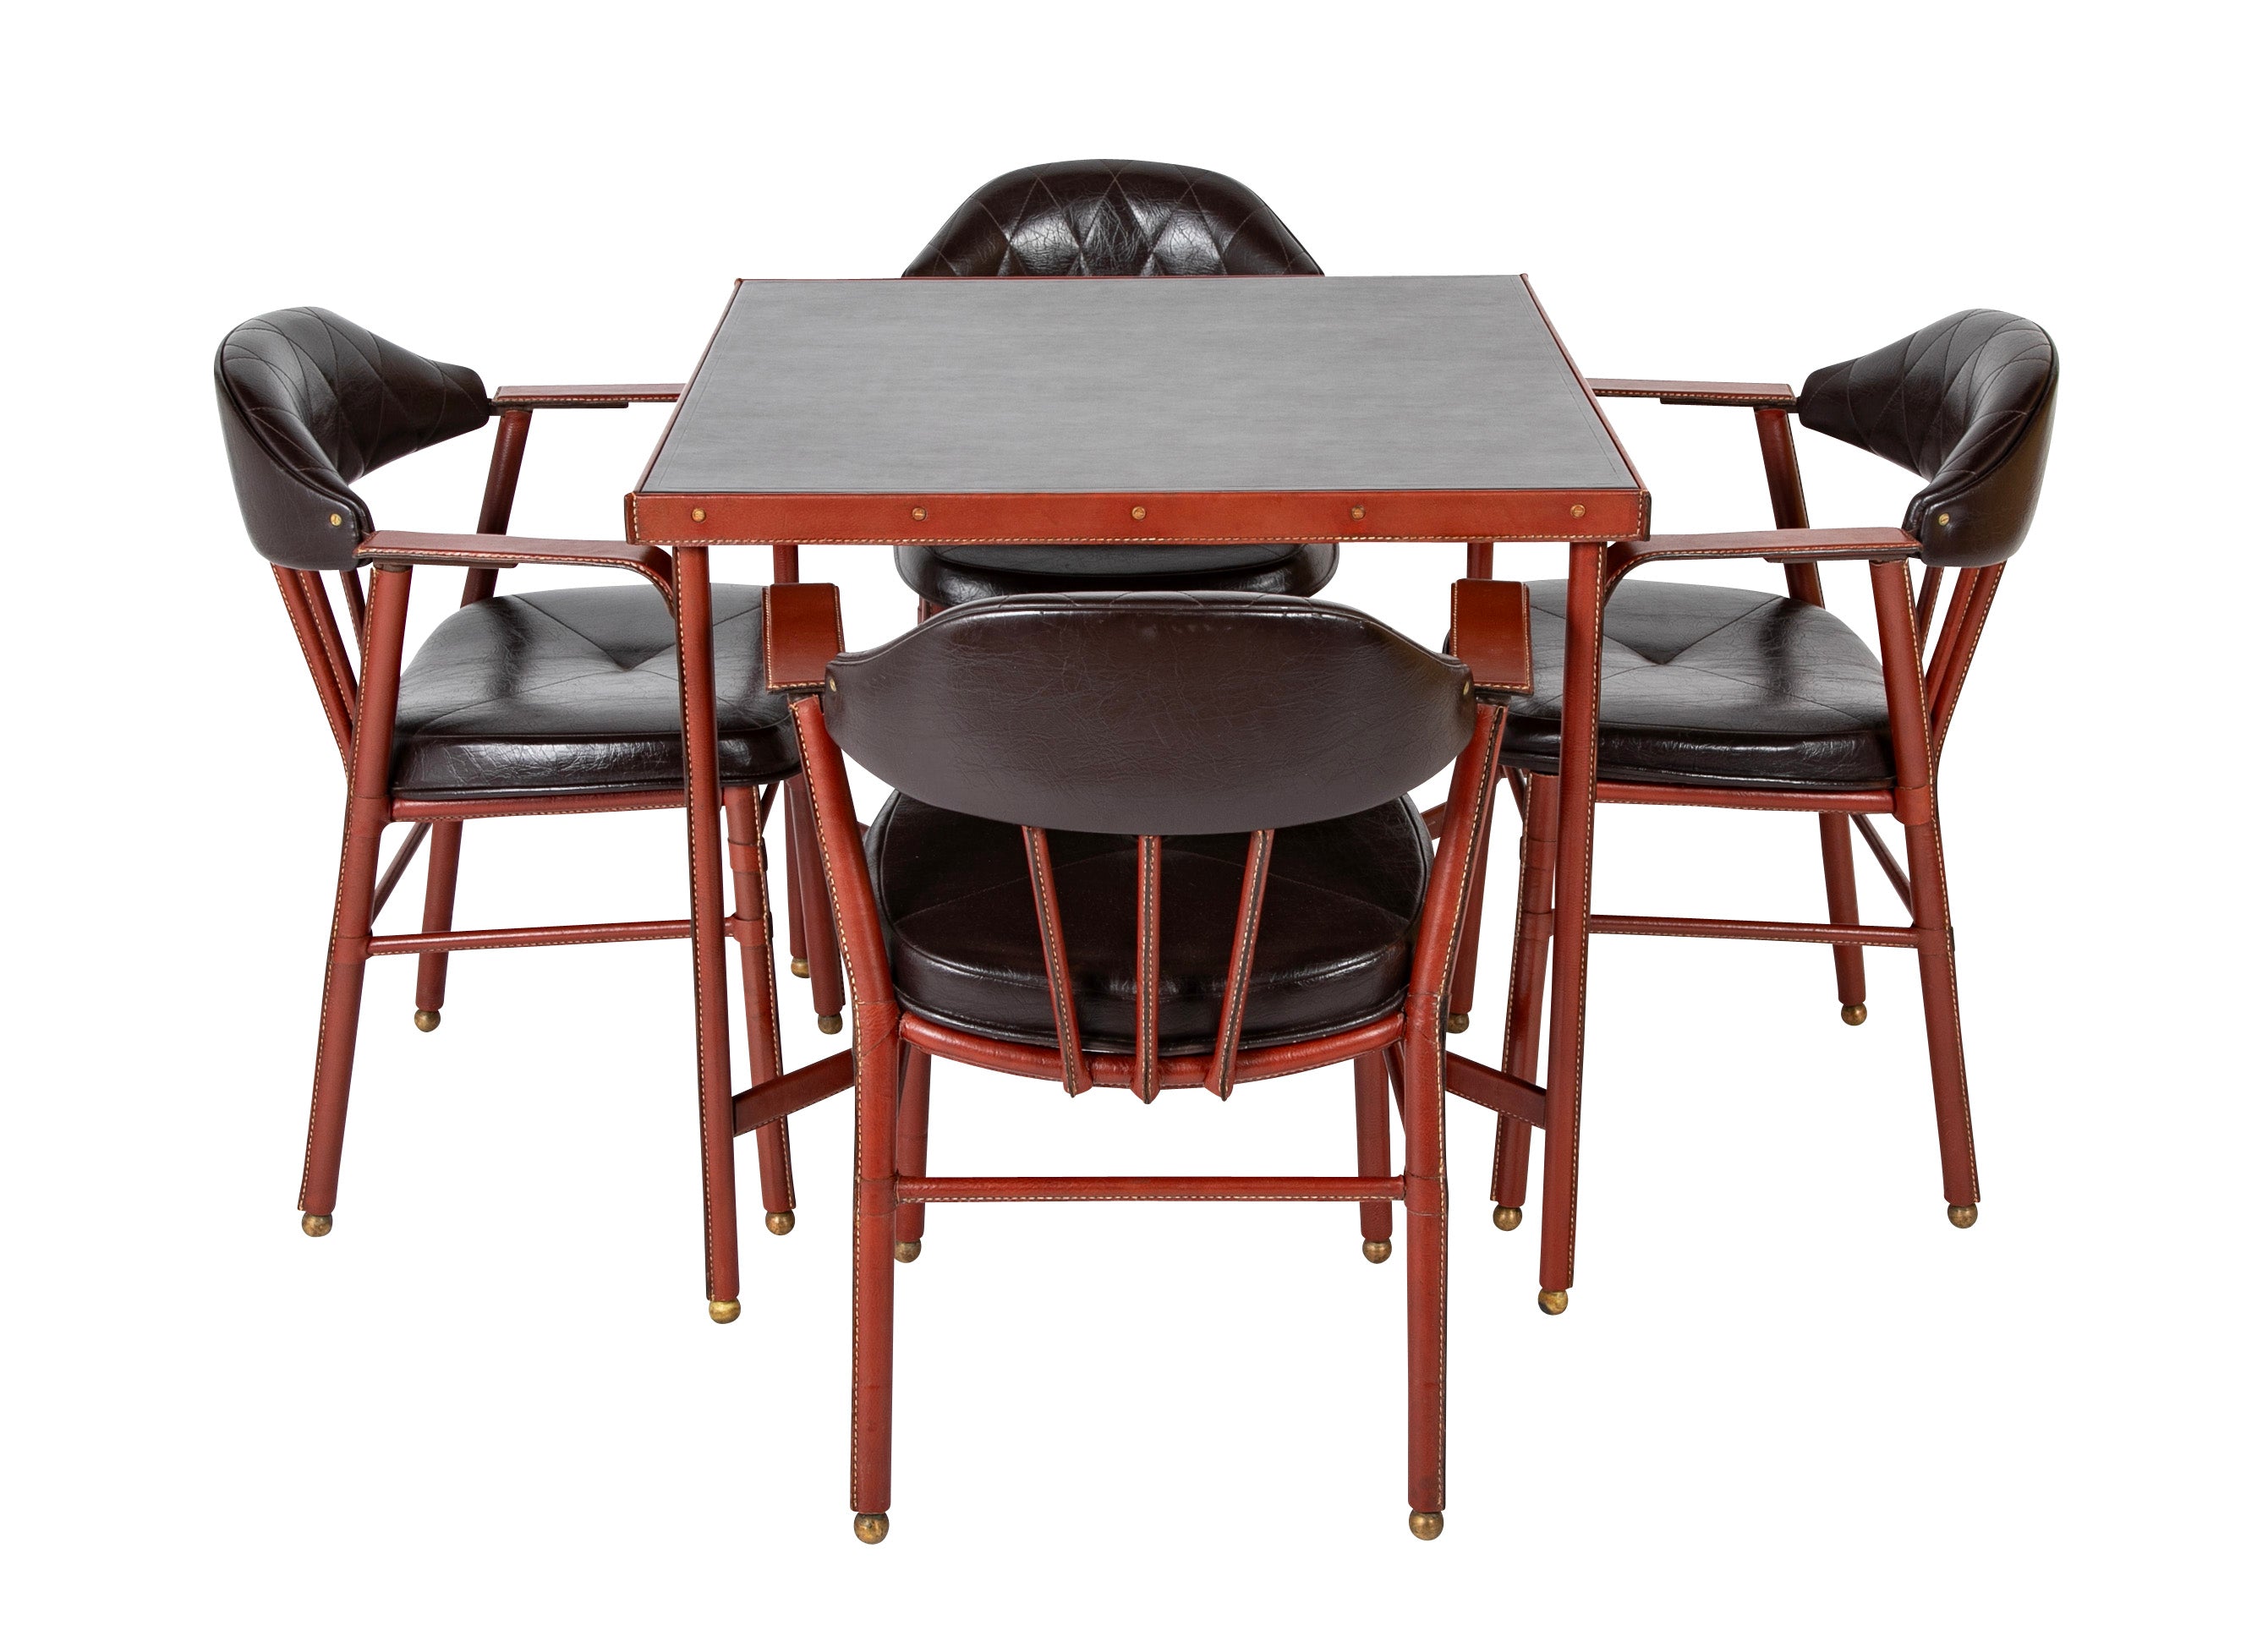 Suite of Jacques Adnet Black & Brown Leather Covered Games Table & Chairs